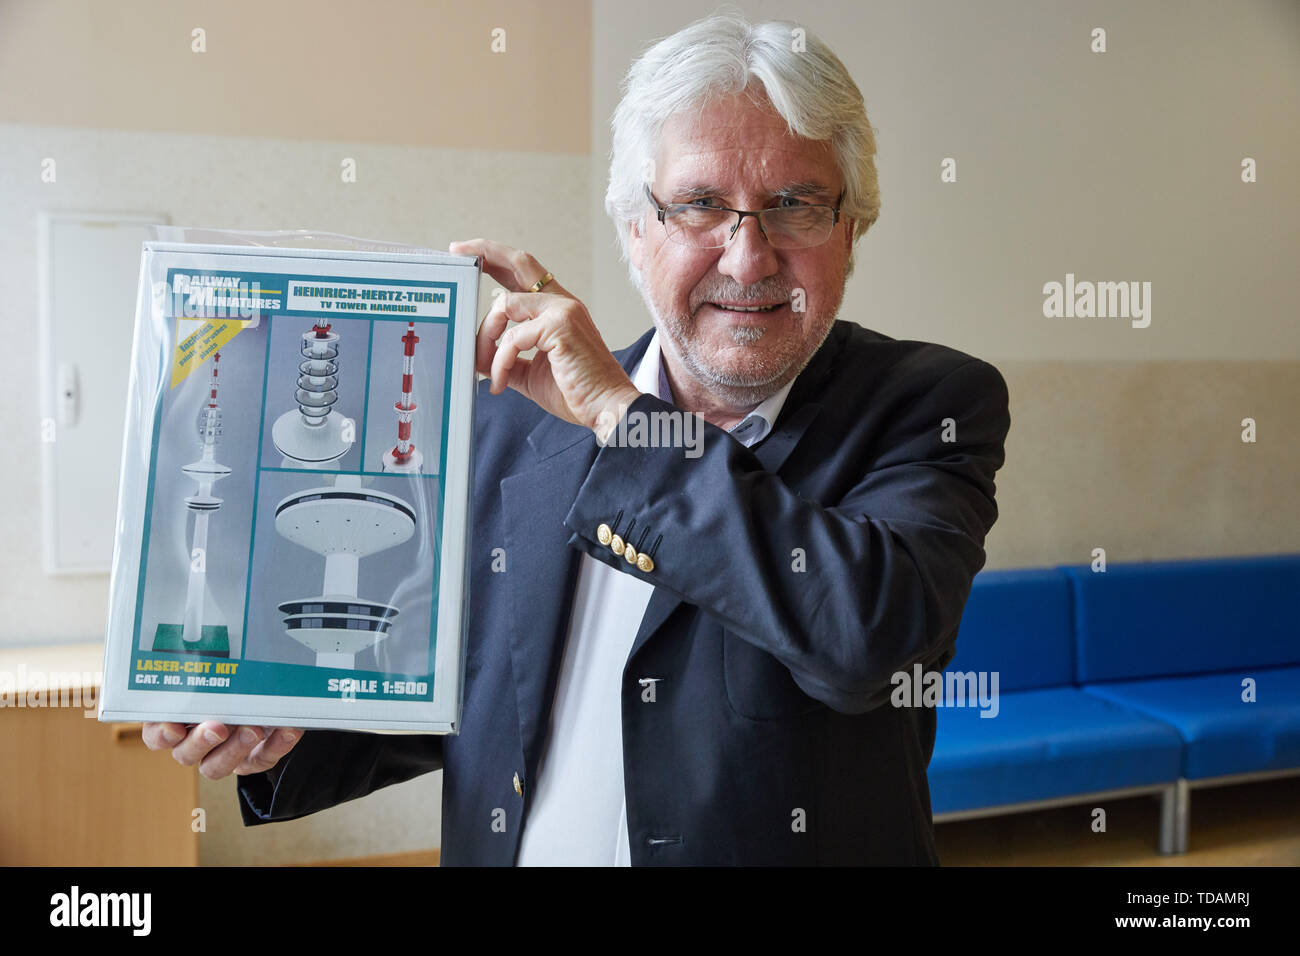 Hamburg, Germany. 14th June, 2019. Hartmut Witte, Marketing, Cooperation and Fundraising Foundation Fernsehturm, holds a model kit of the Heinrich Hertz Tower in his hands. Students of profile class 8 of the Catholic Bonifatius School Wilhelmsburg presented a two meter high model of the Tele-Michel that they had made themselves. With this campaign, the pupils support the Fernsehturm foundation, which is committed to the reopening of the Hamburg television tower. Credit: Georg Wendt/dpa/Alamy Live News Stock Photo